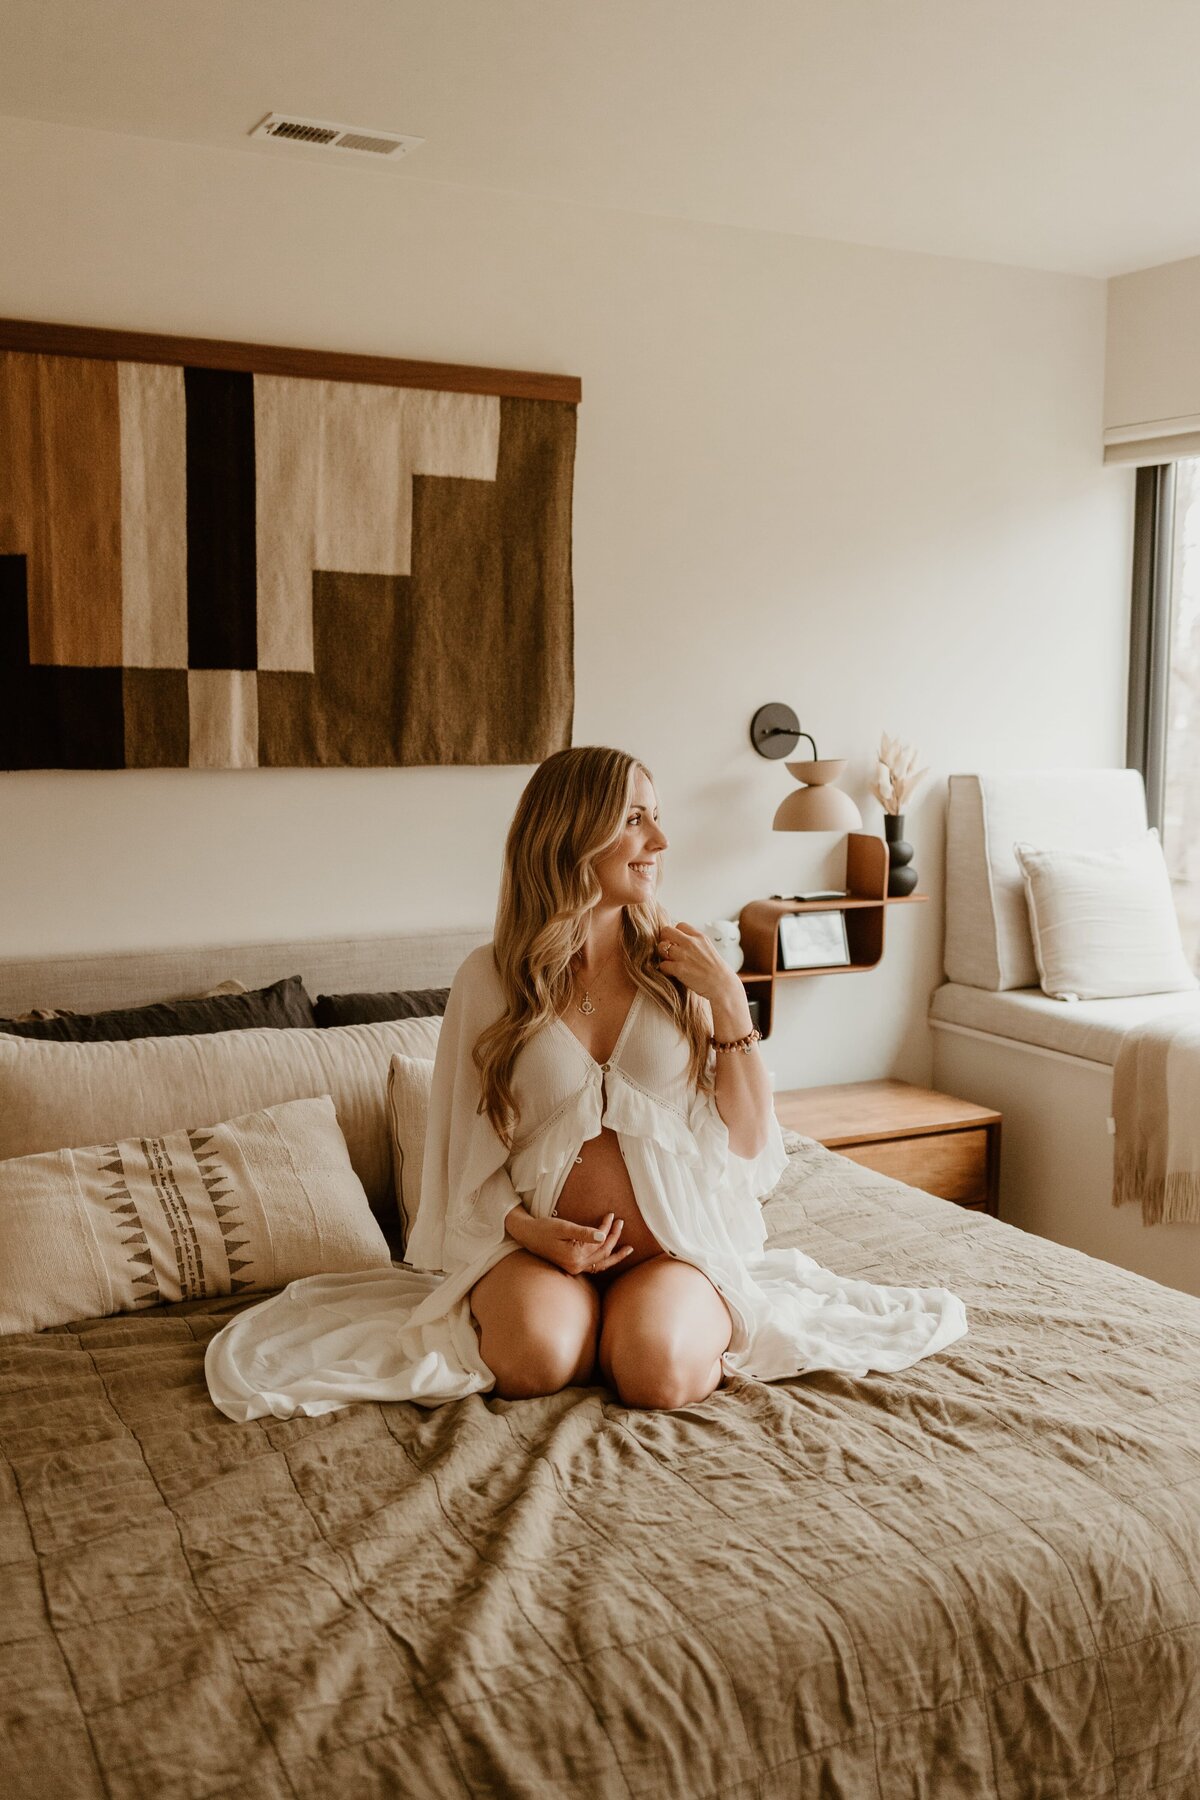 A cheerful pregnant woman sitting cross-legged on a bed, holding her belly, with a neutral-toned, cozy bedroom decor in the background.